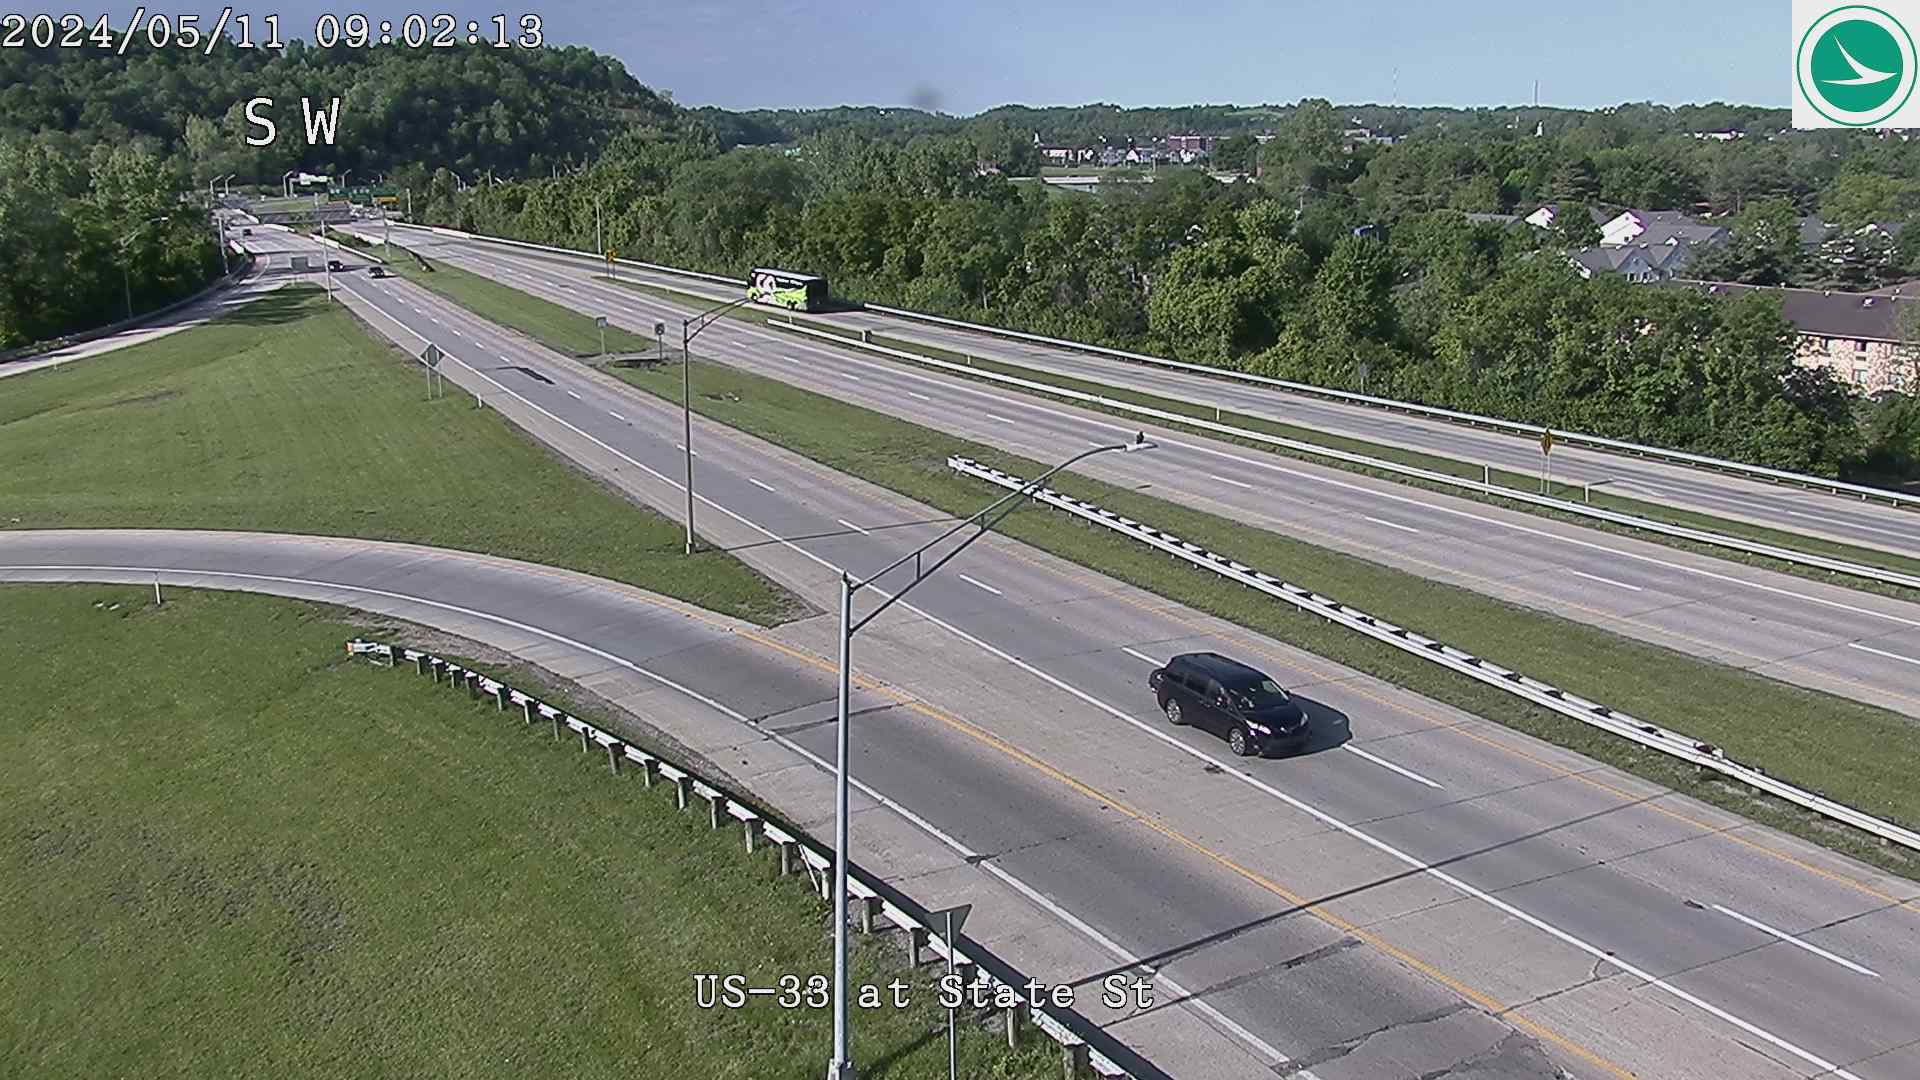 US-33 at E State Rd Traffic Camera